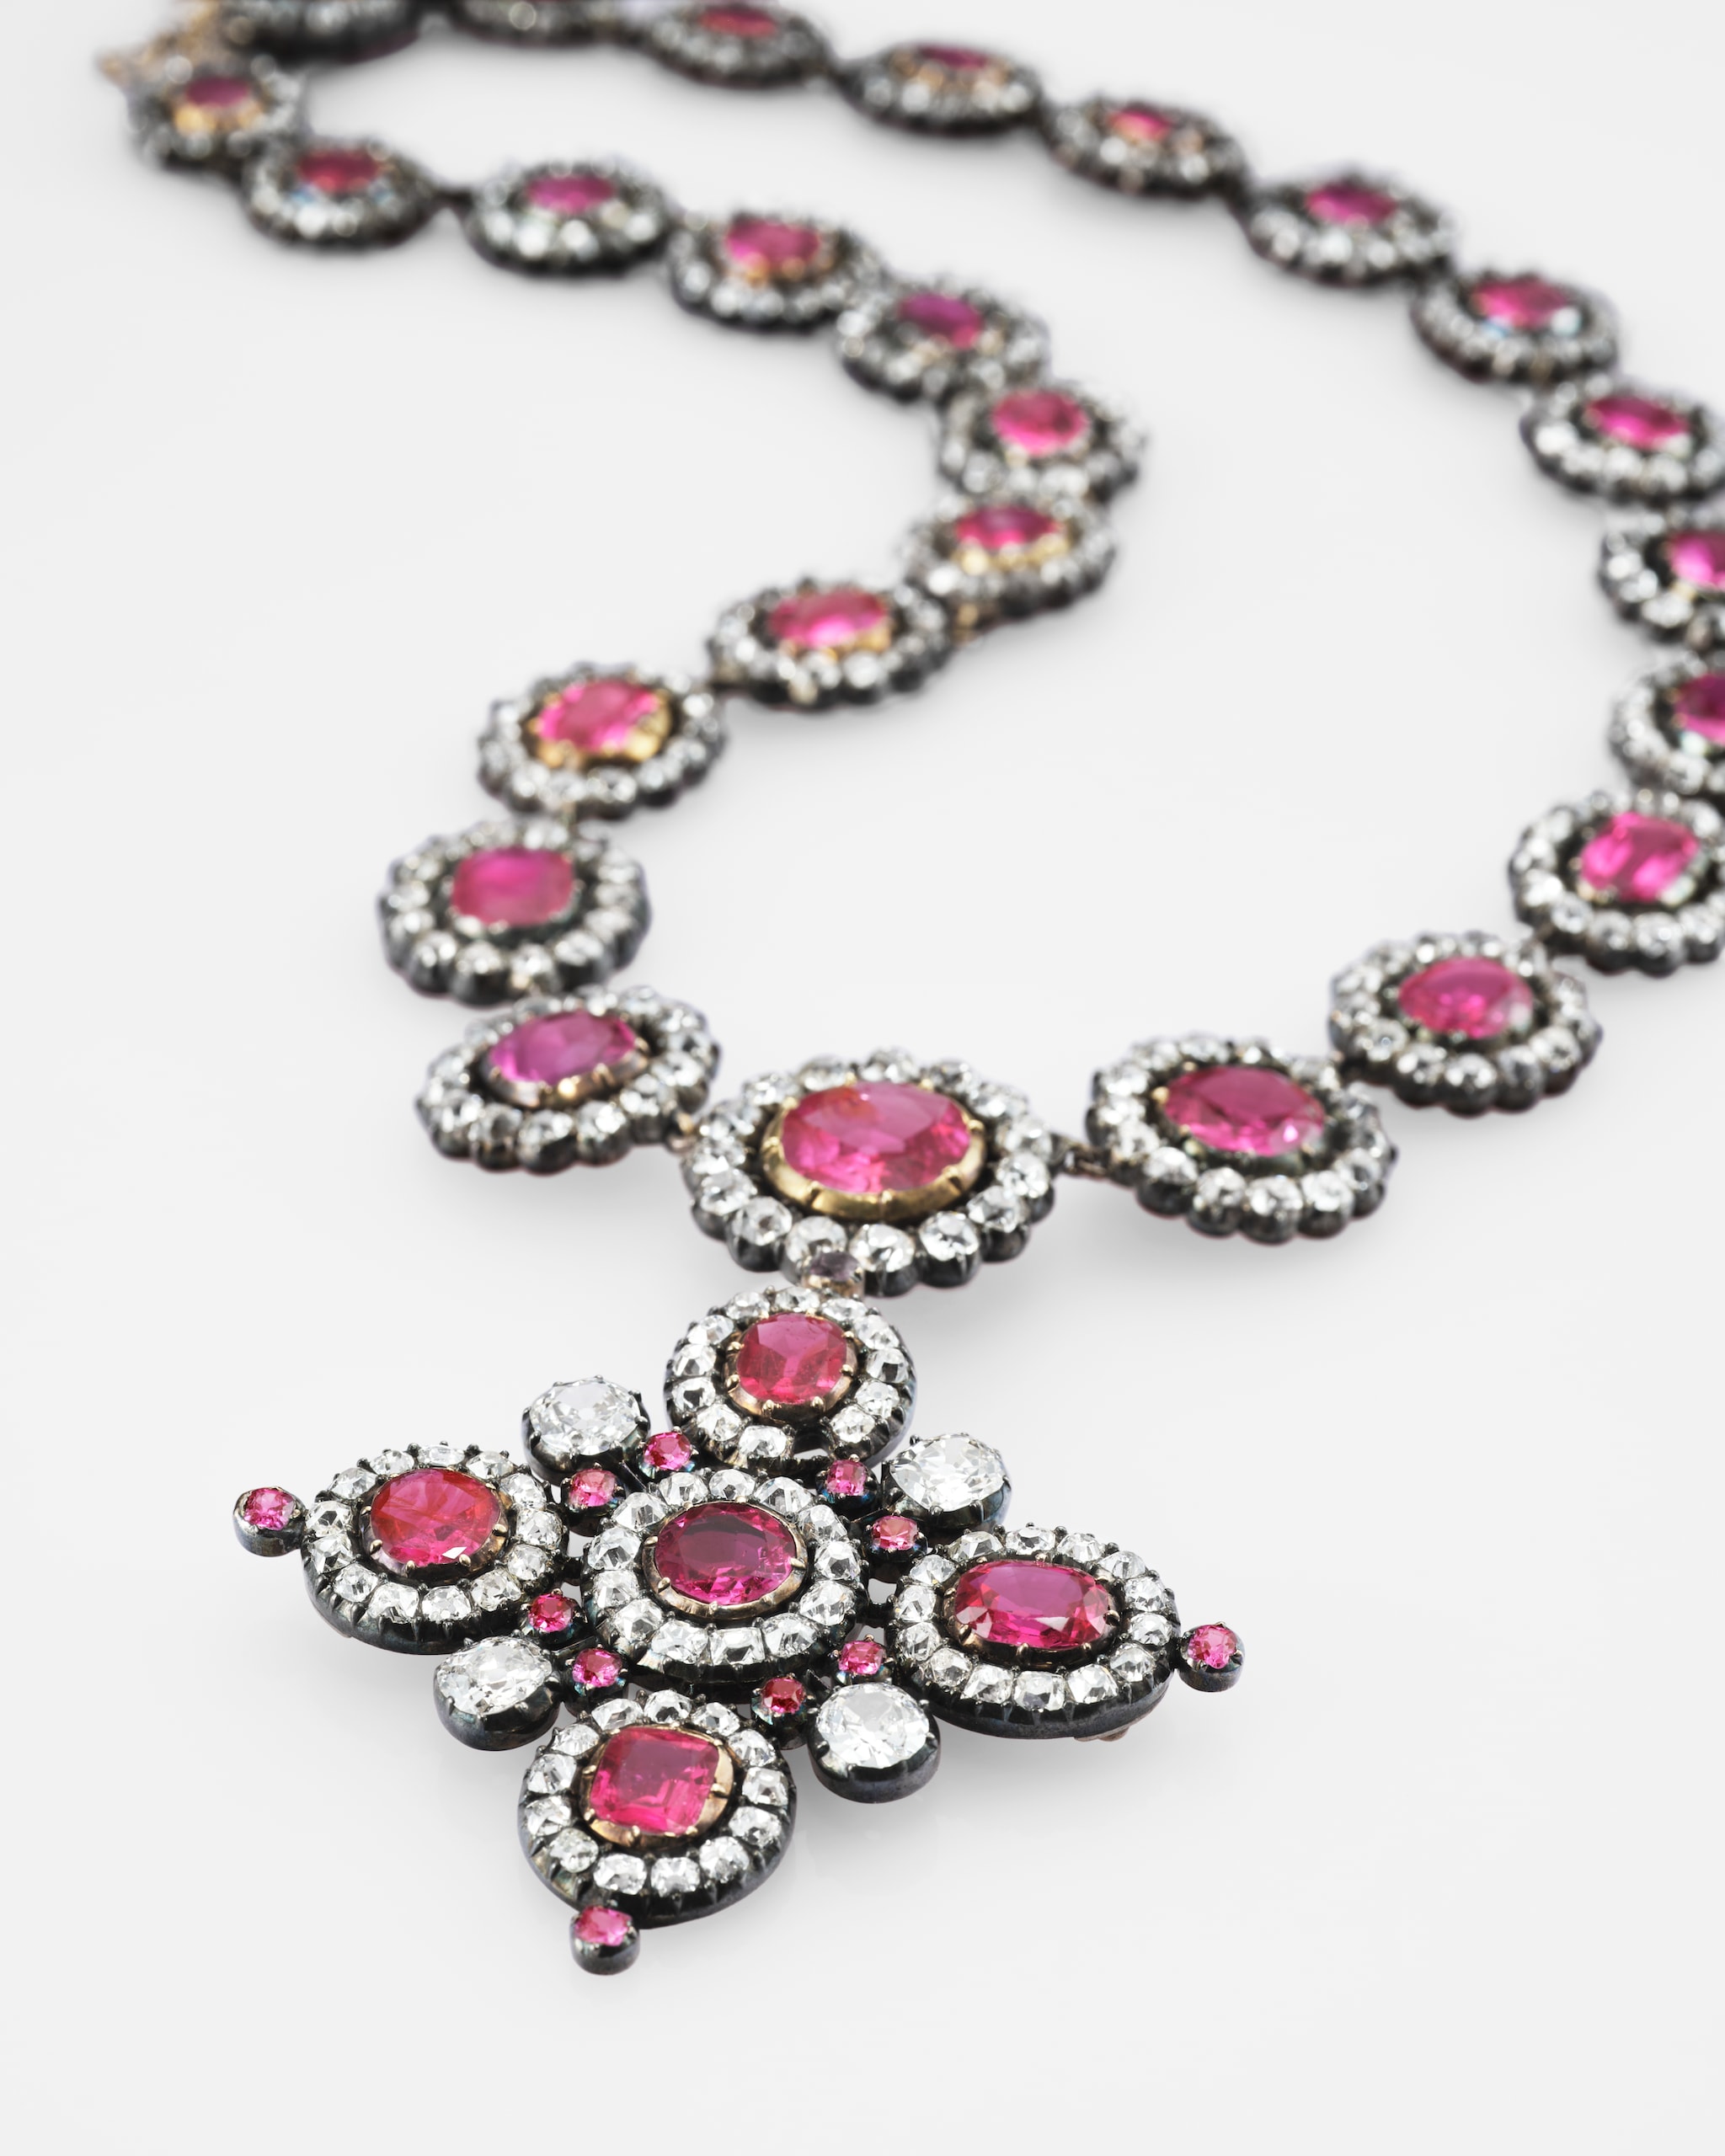 Ruby necklace with detachable pendant. An Eye For Beauty, Illuminata Jewelry Collection Exhibition, L'ECOLE, School of Jewelry Arts, K11 MUSEA, Hong Kong